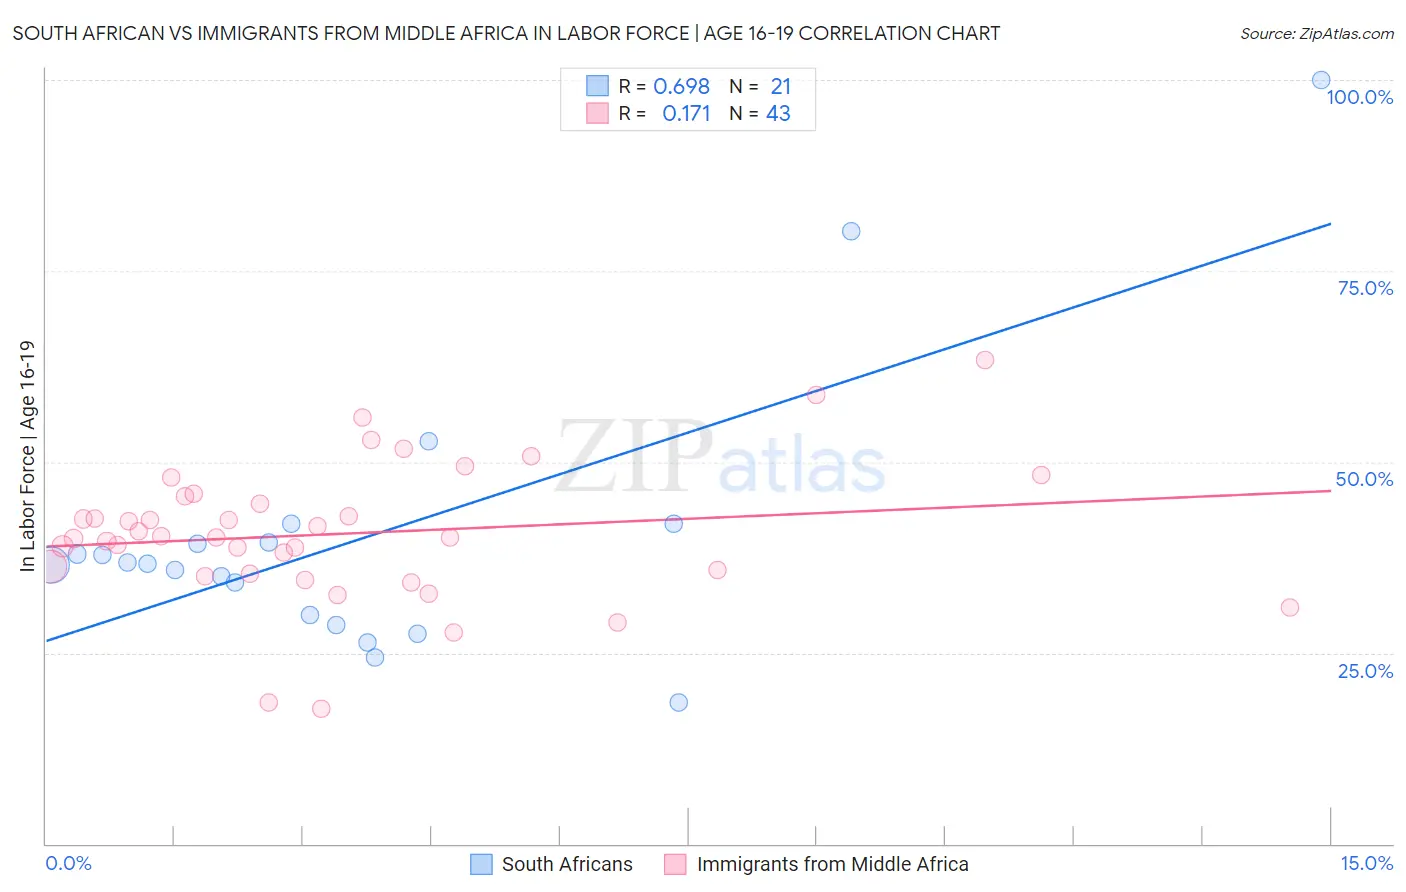 South African vs Immigrants from Middle Africa In Labor Force | Age 16-19